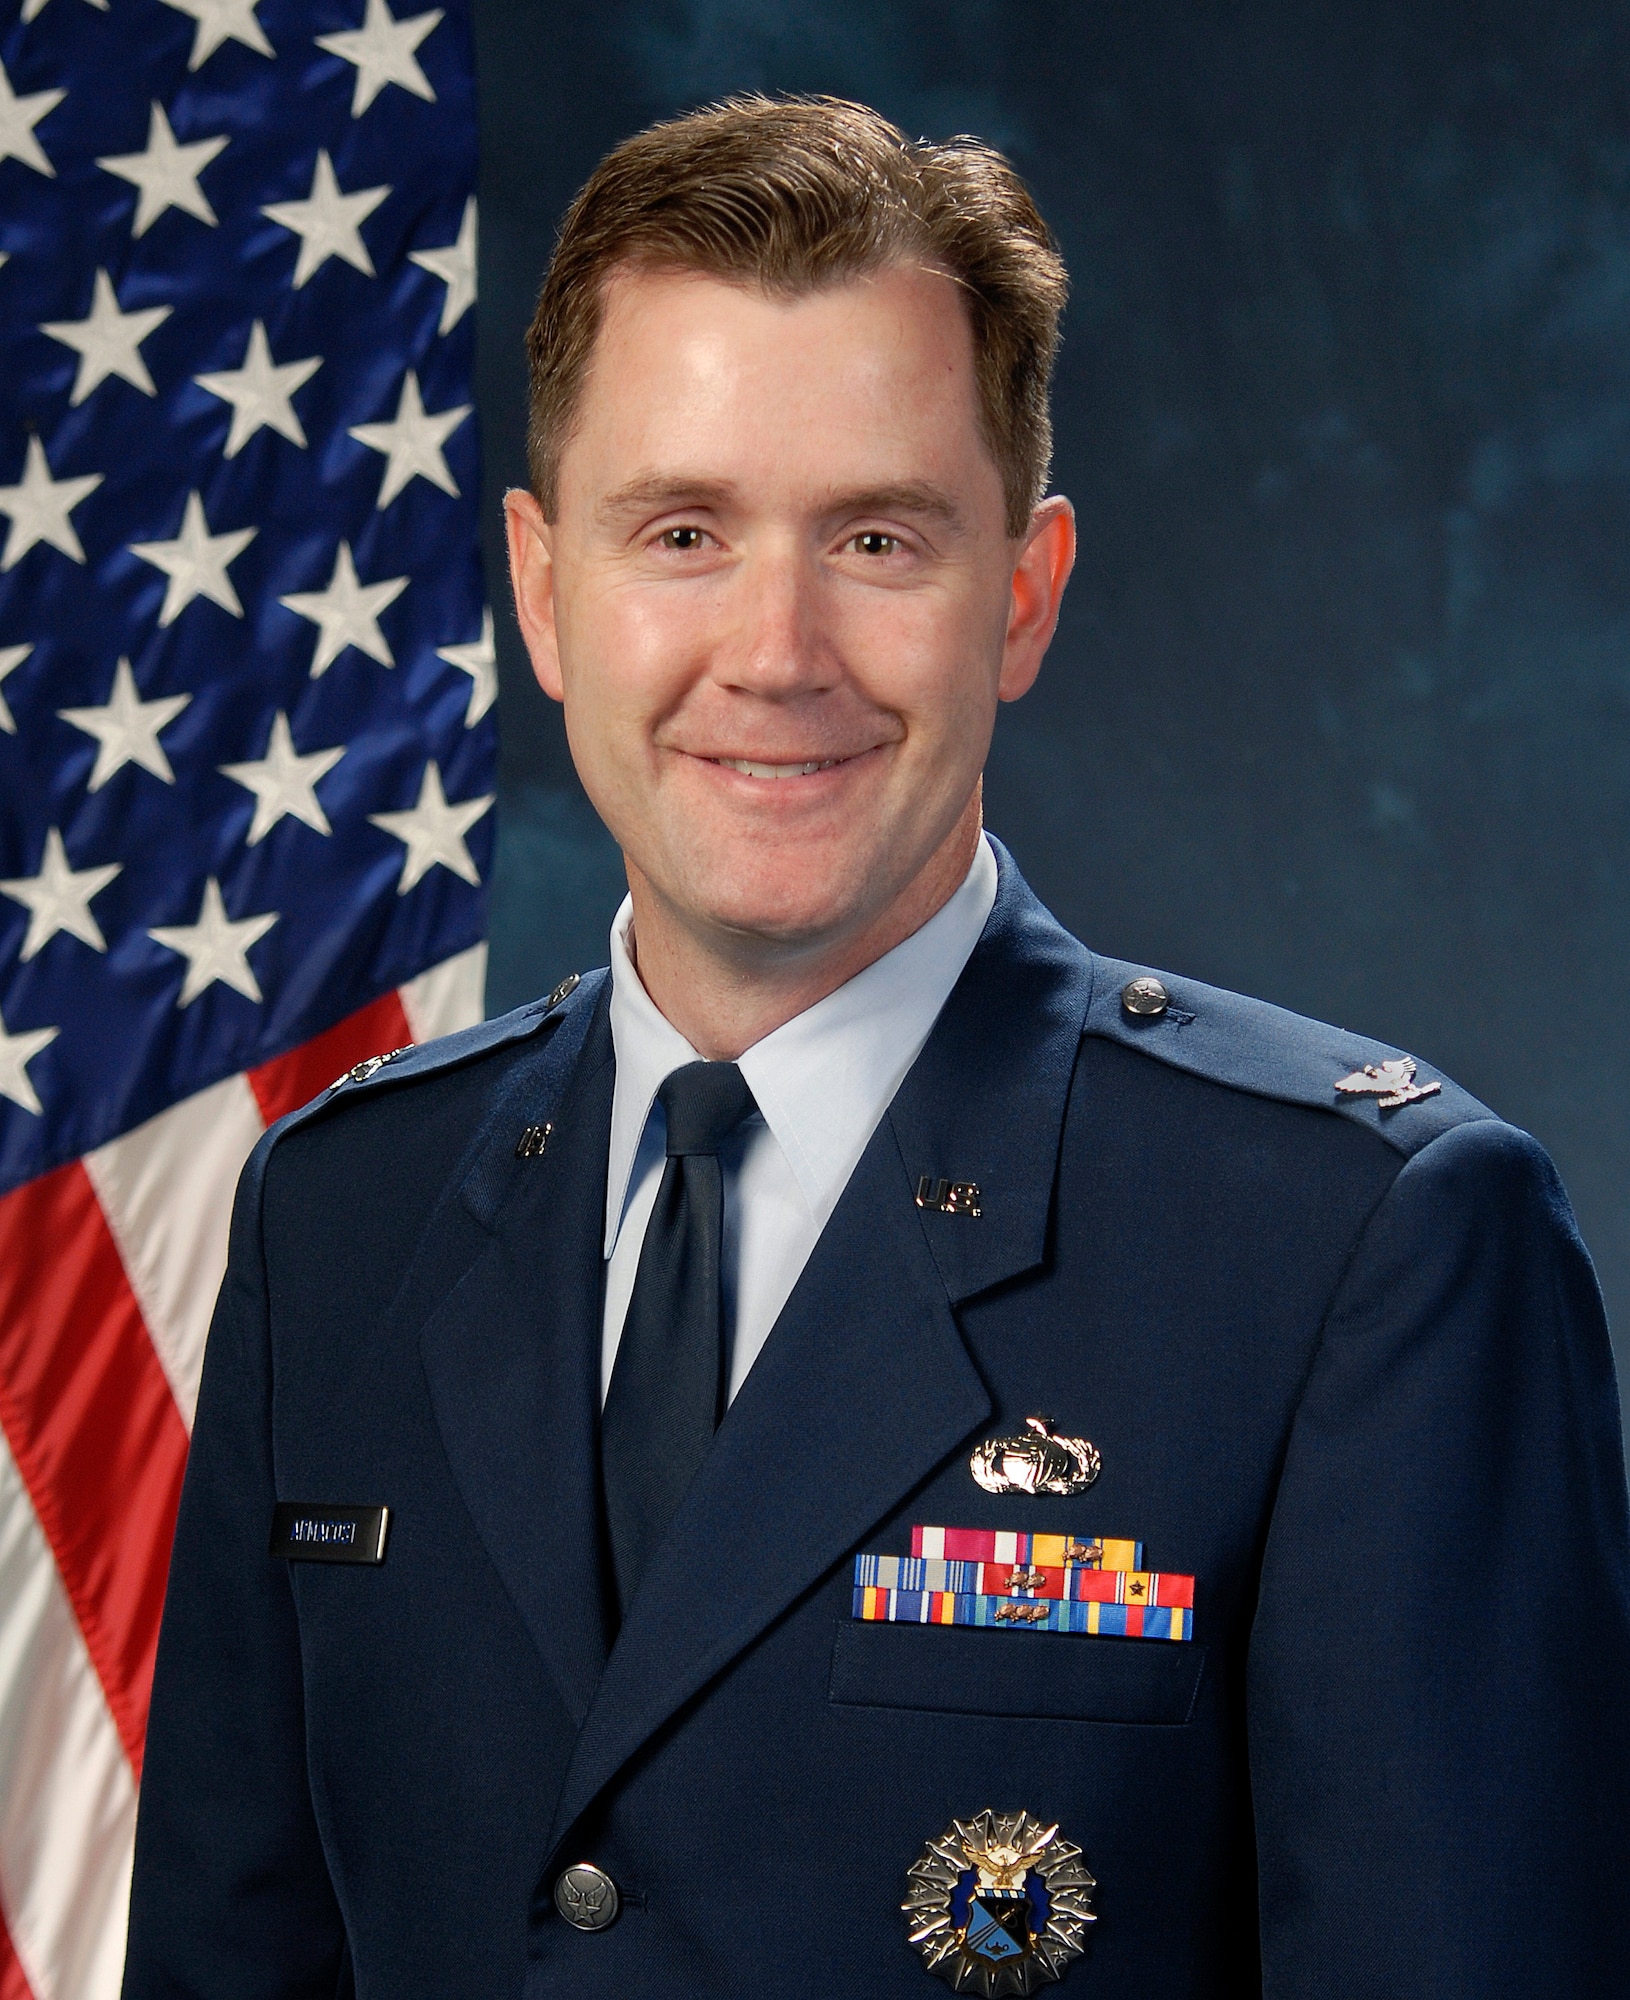 Col. Andrew Armacost was nominated by the president to be the Air Force Academy's next dean of the faculty. Armacost is presently the permanent professor and head of the Academy's Management Department. (U.S. Air Force photo)